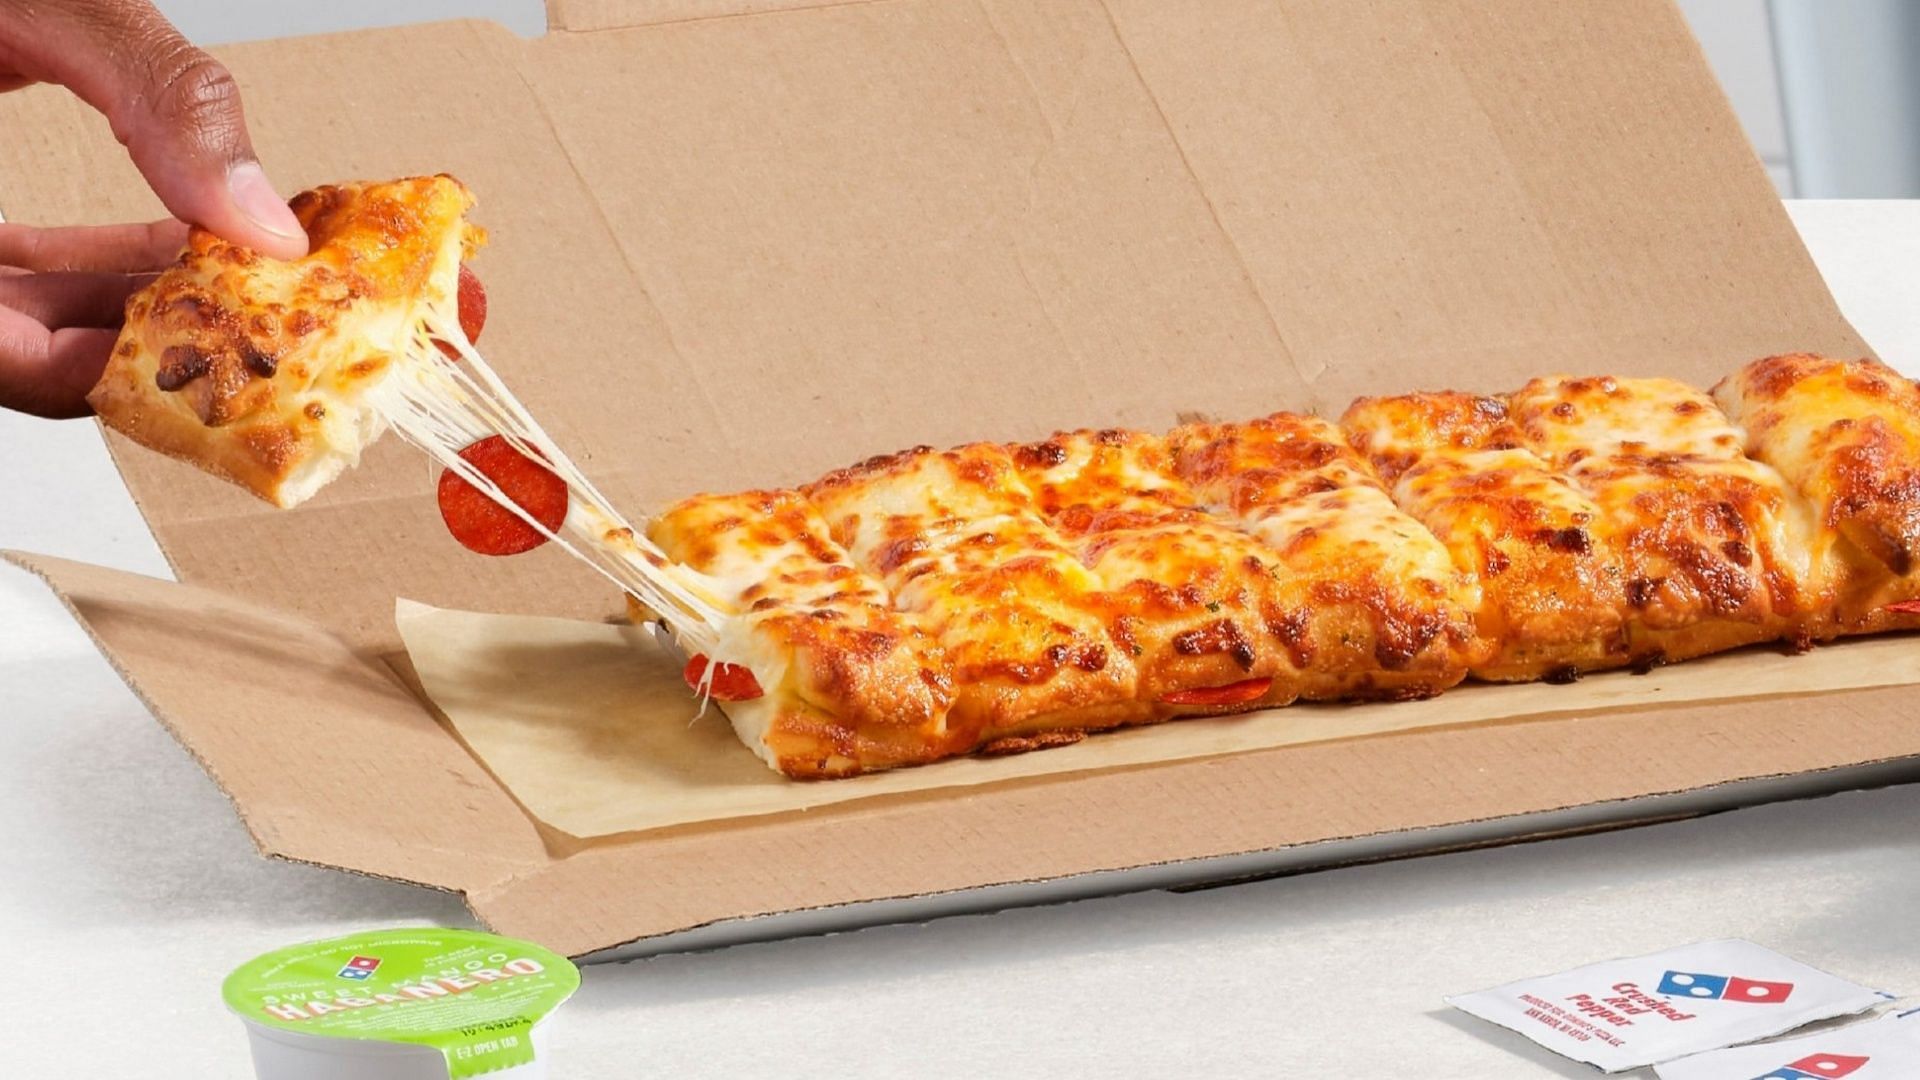 The new Pepperoni Stuffed Cheesy Bread hits stores starting August 21 (Image via Domino&rsquo;s)